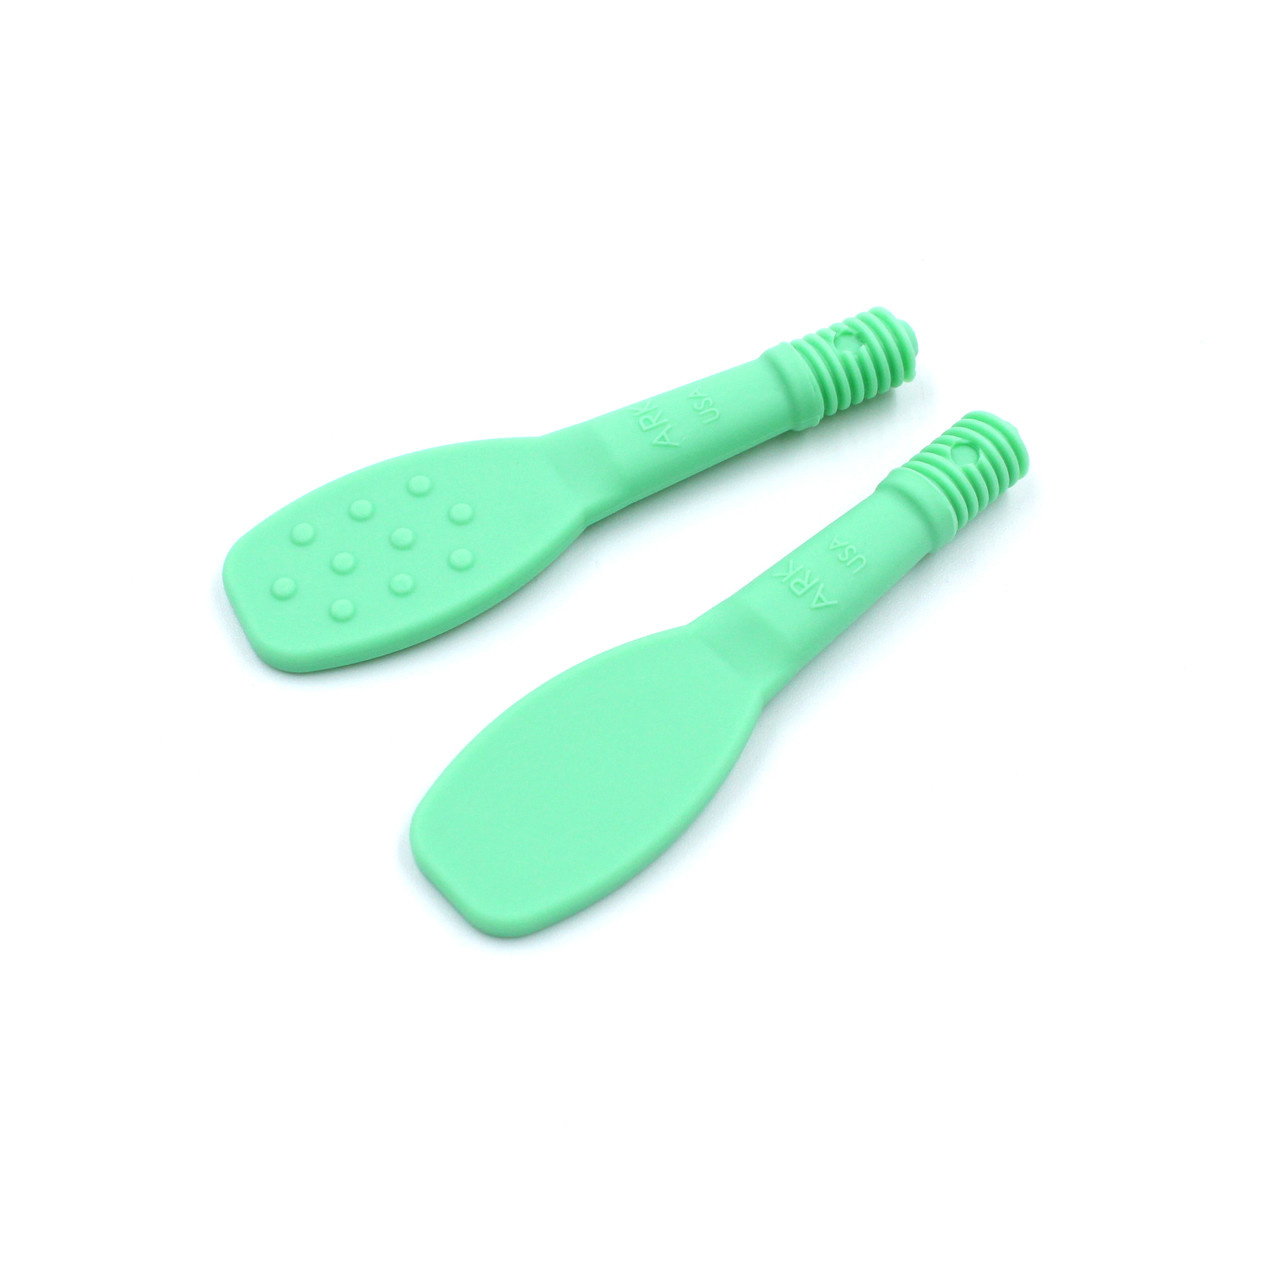 ARK-therapeutic ARK's DnZ Vibe FLAT Textured Spoon Tip